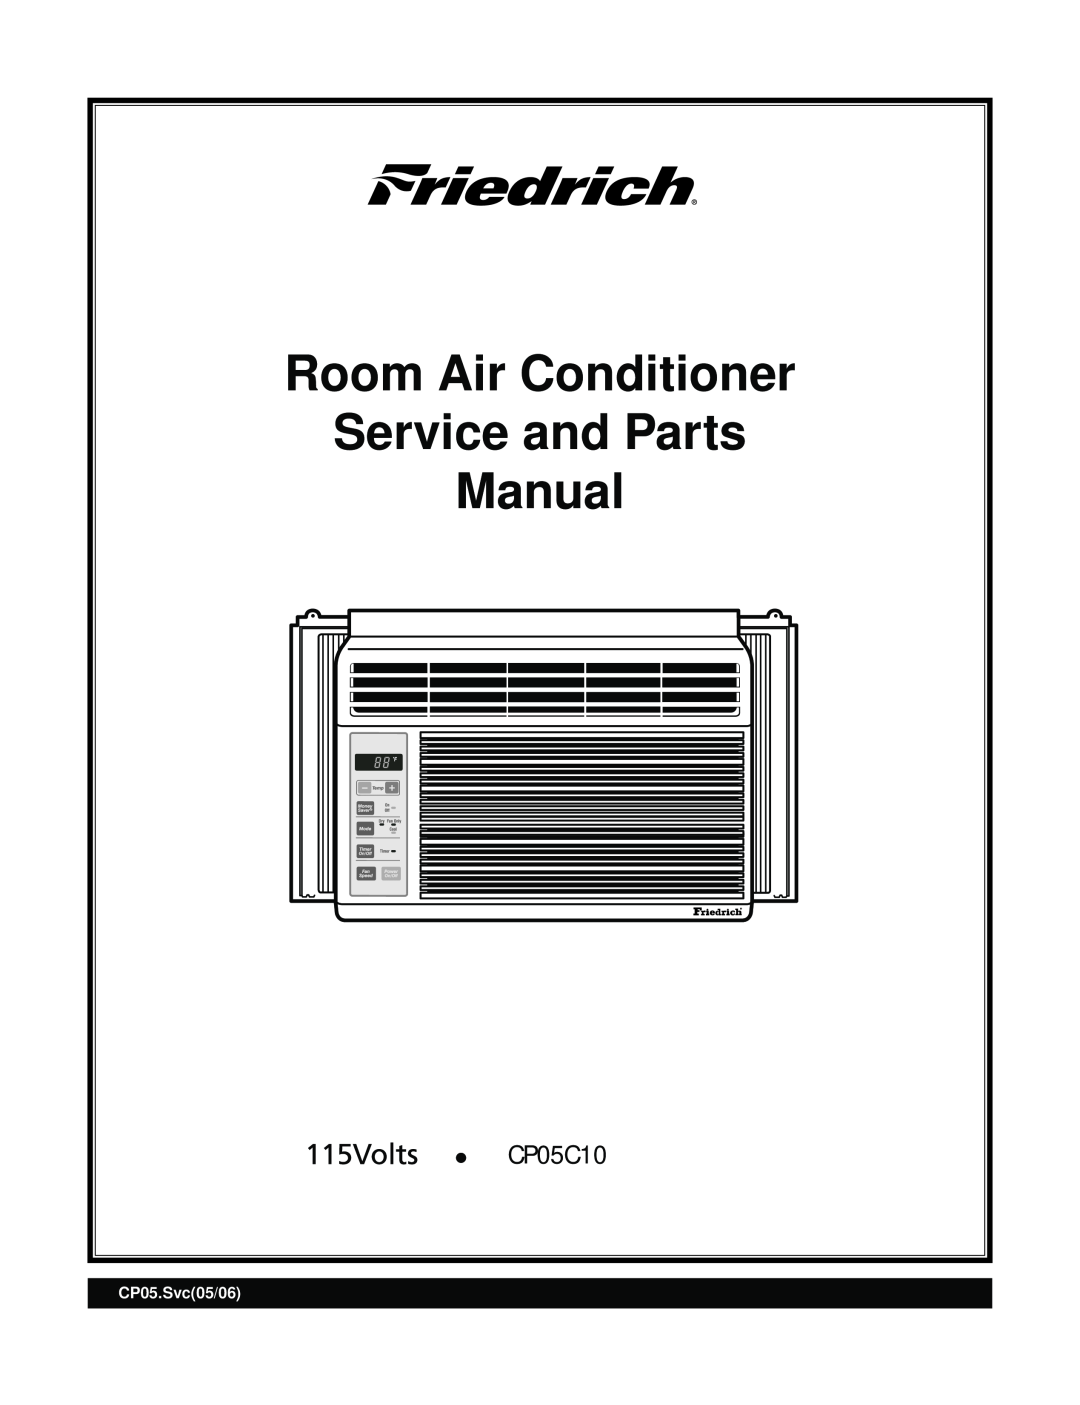 Friedrich CP05C10 manual Room Air Conditioner Service and Parts Manual, CP05.Svc05/06 